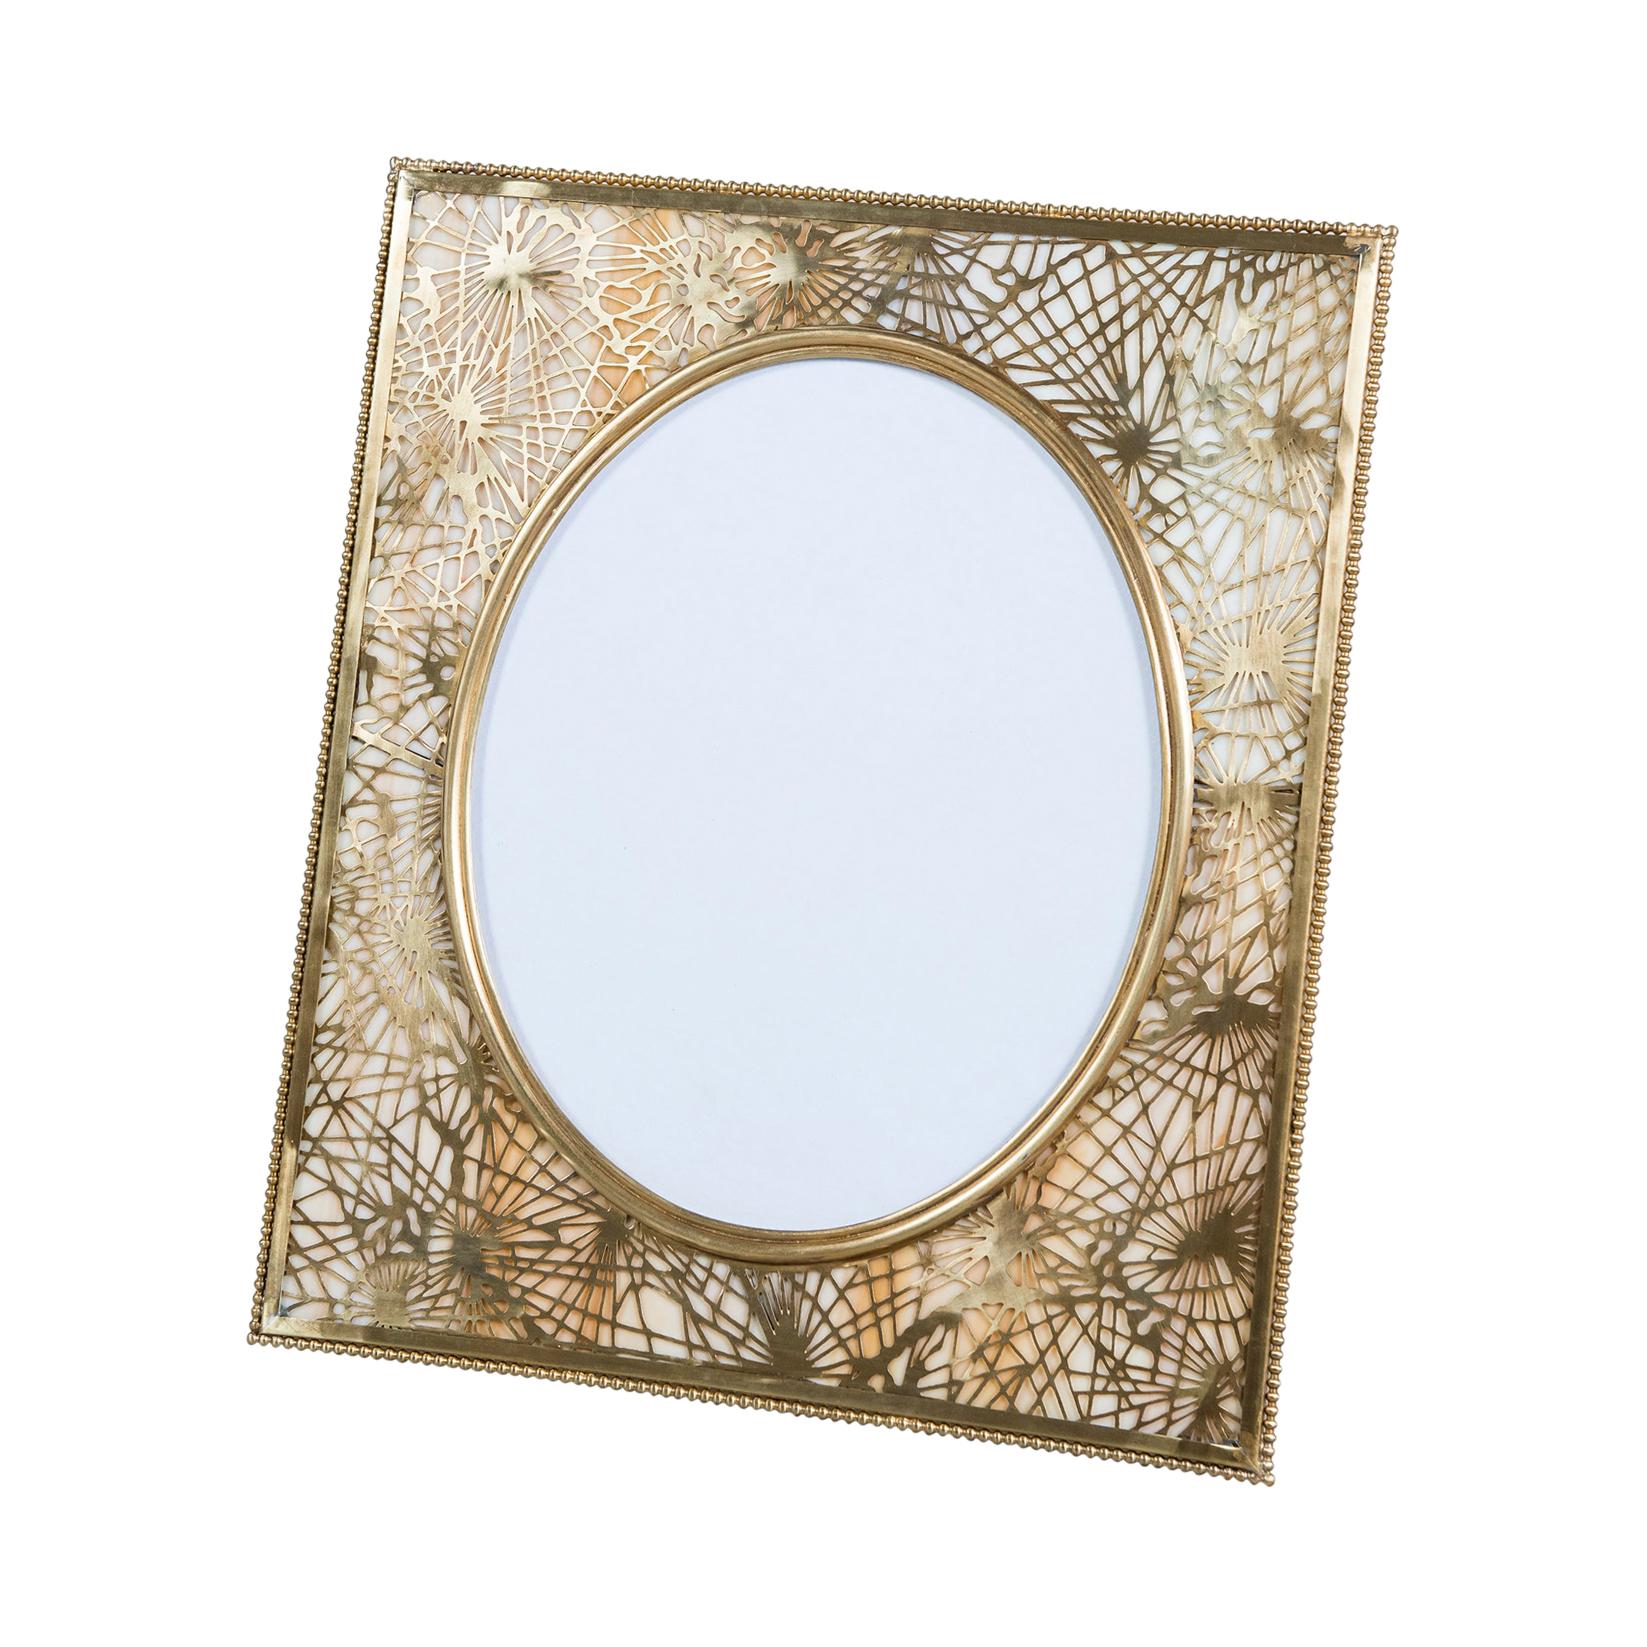 Bronze and Slag Glass Tiffany Picture Frame, Art Deco Period, United States 1900